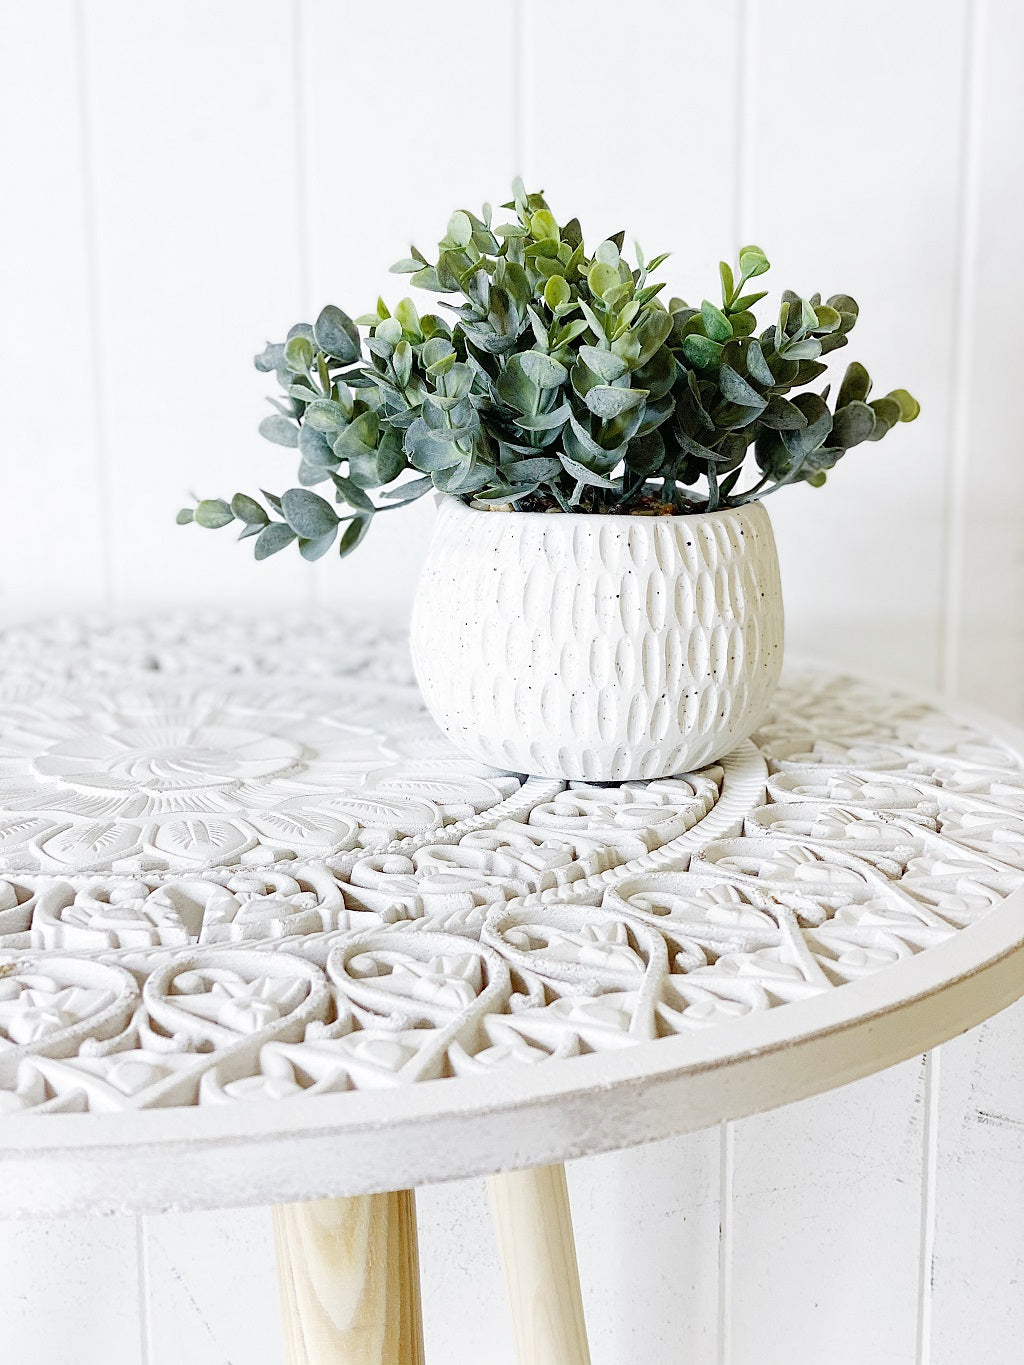 Liven up your indoor spaces with our Eucalyptus Bush in Speckled Ceramic Pot. With its speckle vase, it will add texture and colour to any room. Great for adding a splash of colour to a bathroom or windowsill. Shop Online. AfterPay Available. Australia Wide Shipping | Bliss Gifts & Homewares - Unit 8, 259 Princes Hwy Ulladulla - 0427795959, 44541523